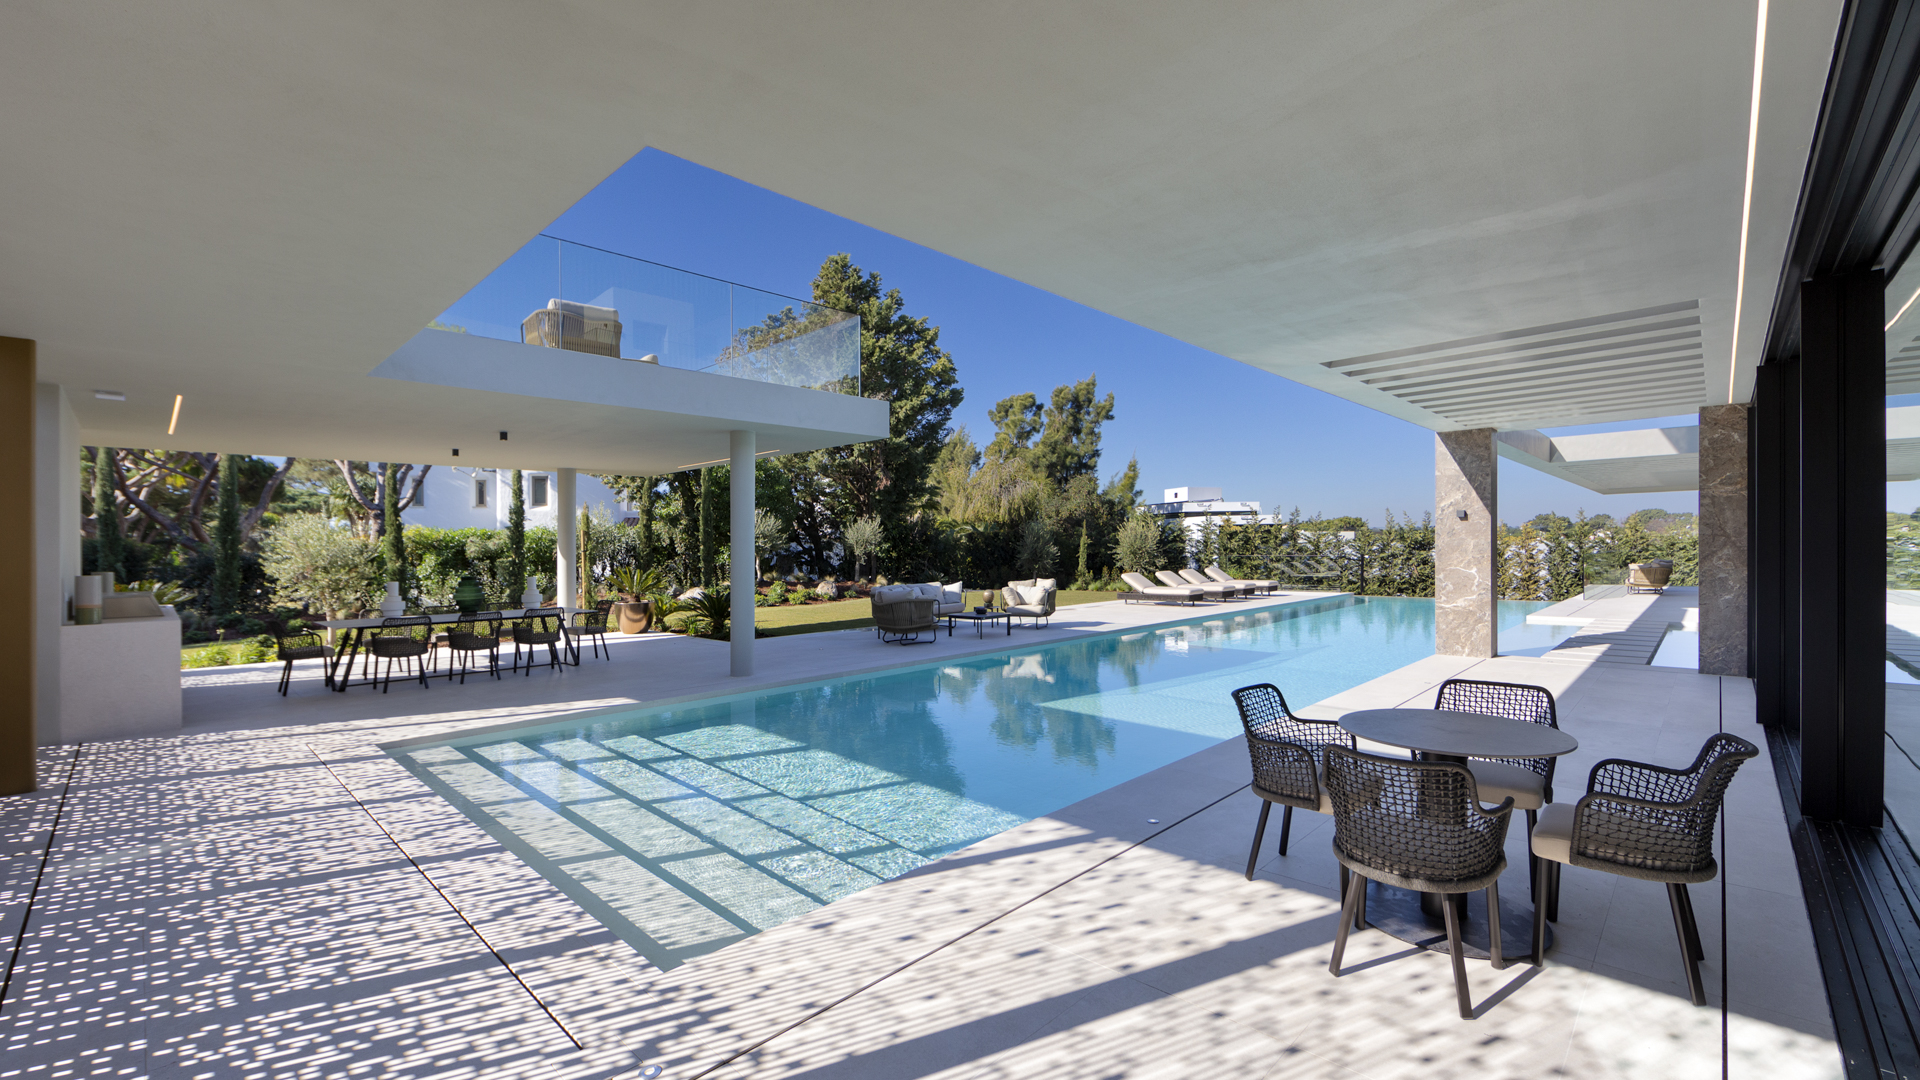 LUXURIA LIFESTYLE INTERNATIONAL WELCOMES JSH, ALGARVE’S ARCHITECTURAL DESIGN EXPERT